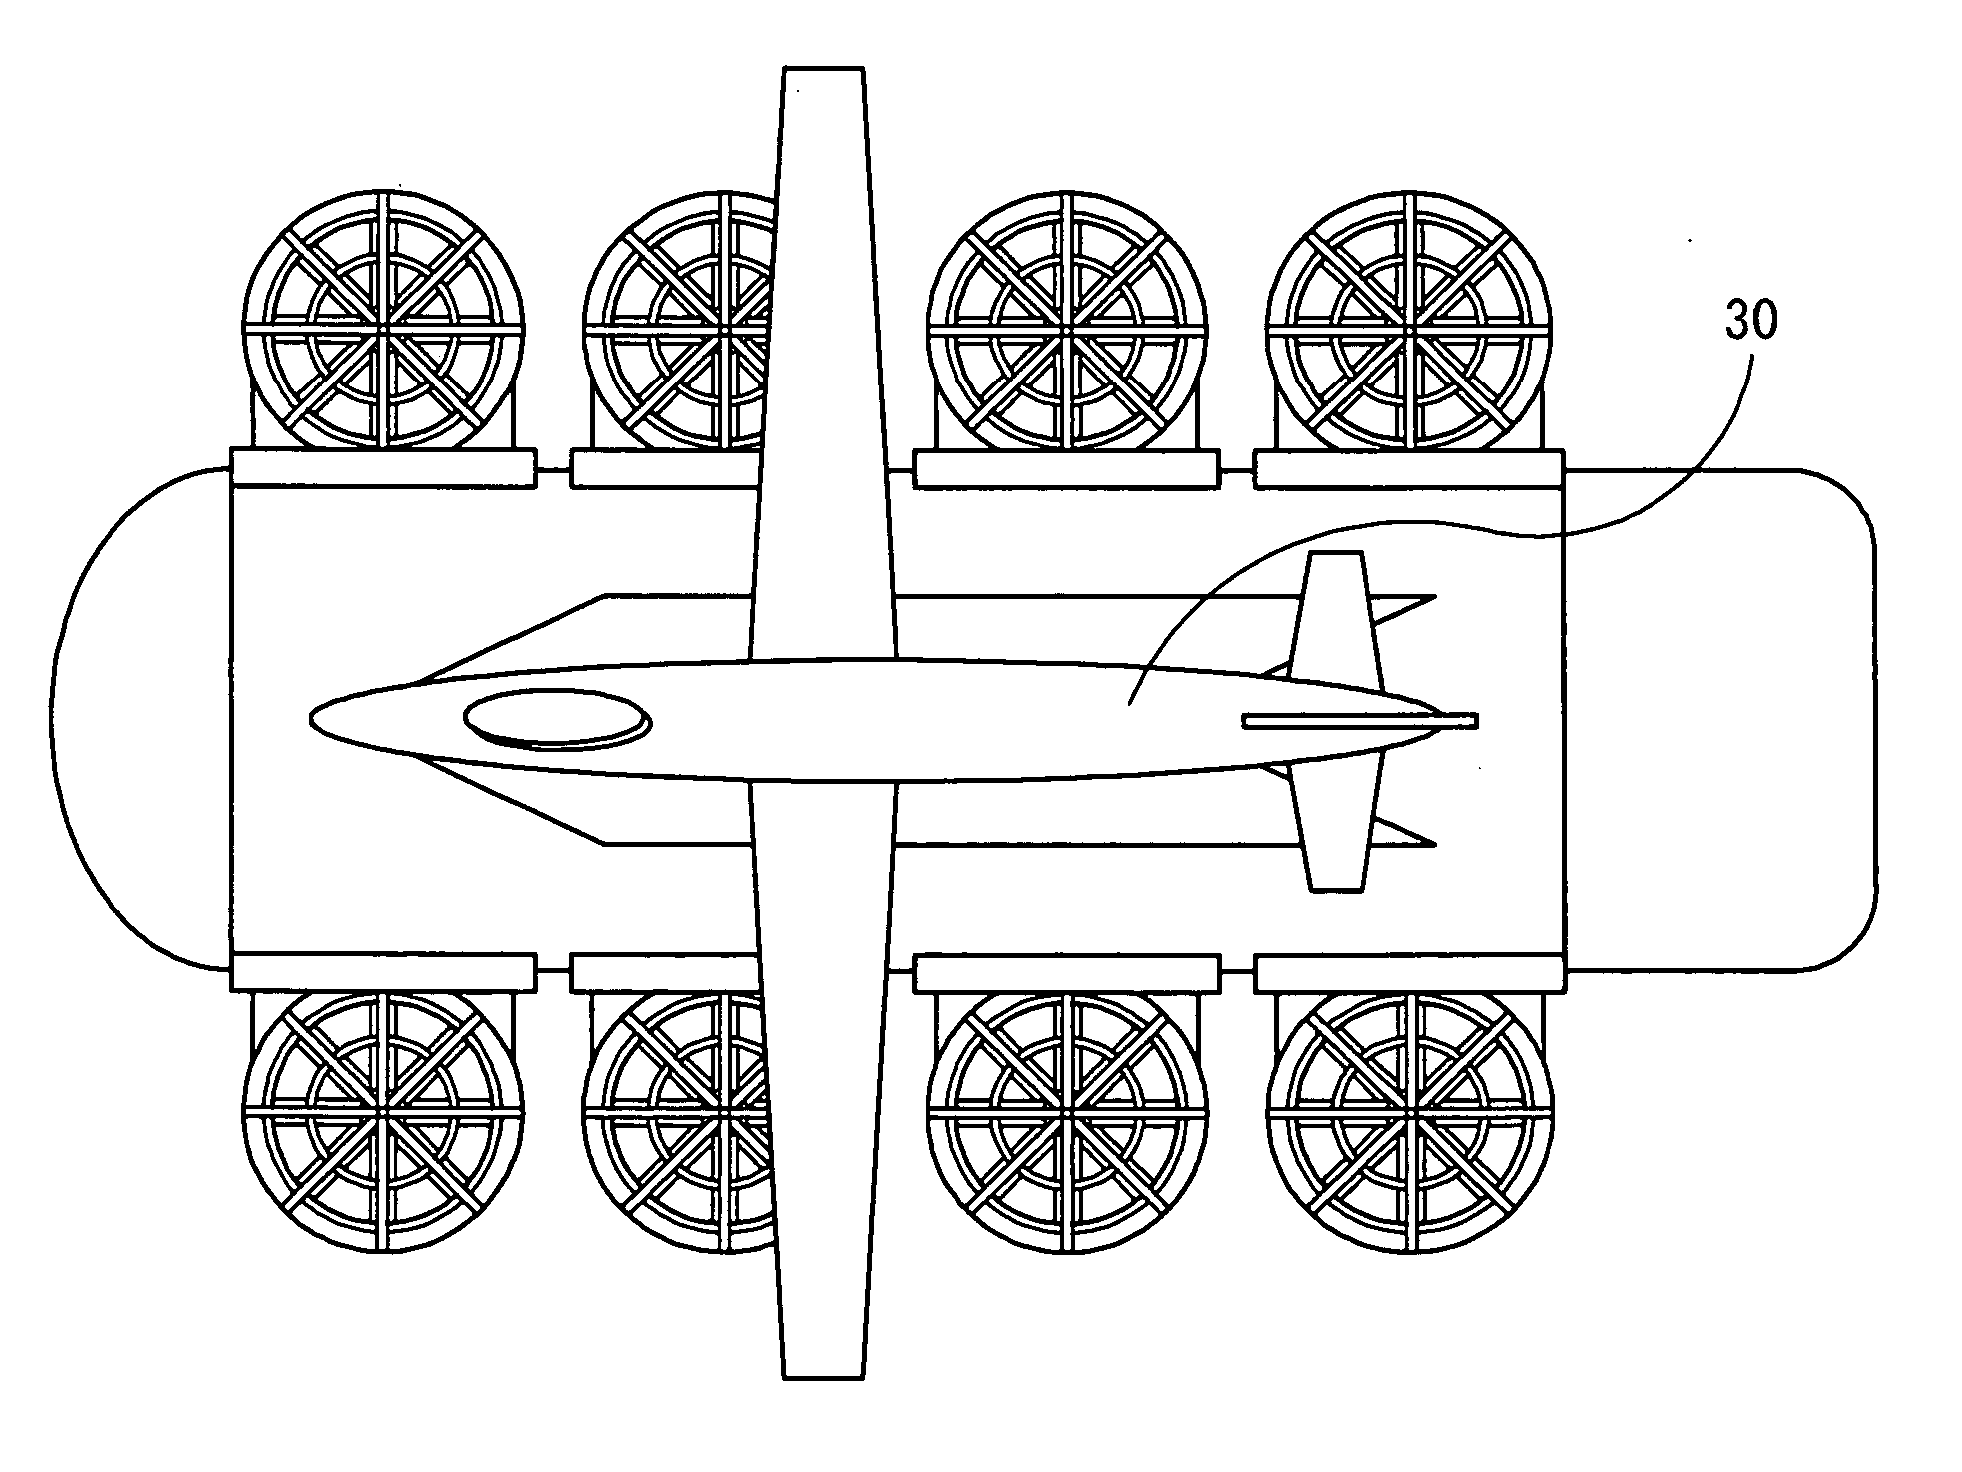 Aircraft Produced by Fixing Rapid Airflow Generation Wind Direction Changing Device Directly and Firmly to Side Surface or Wall Thereof